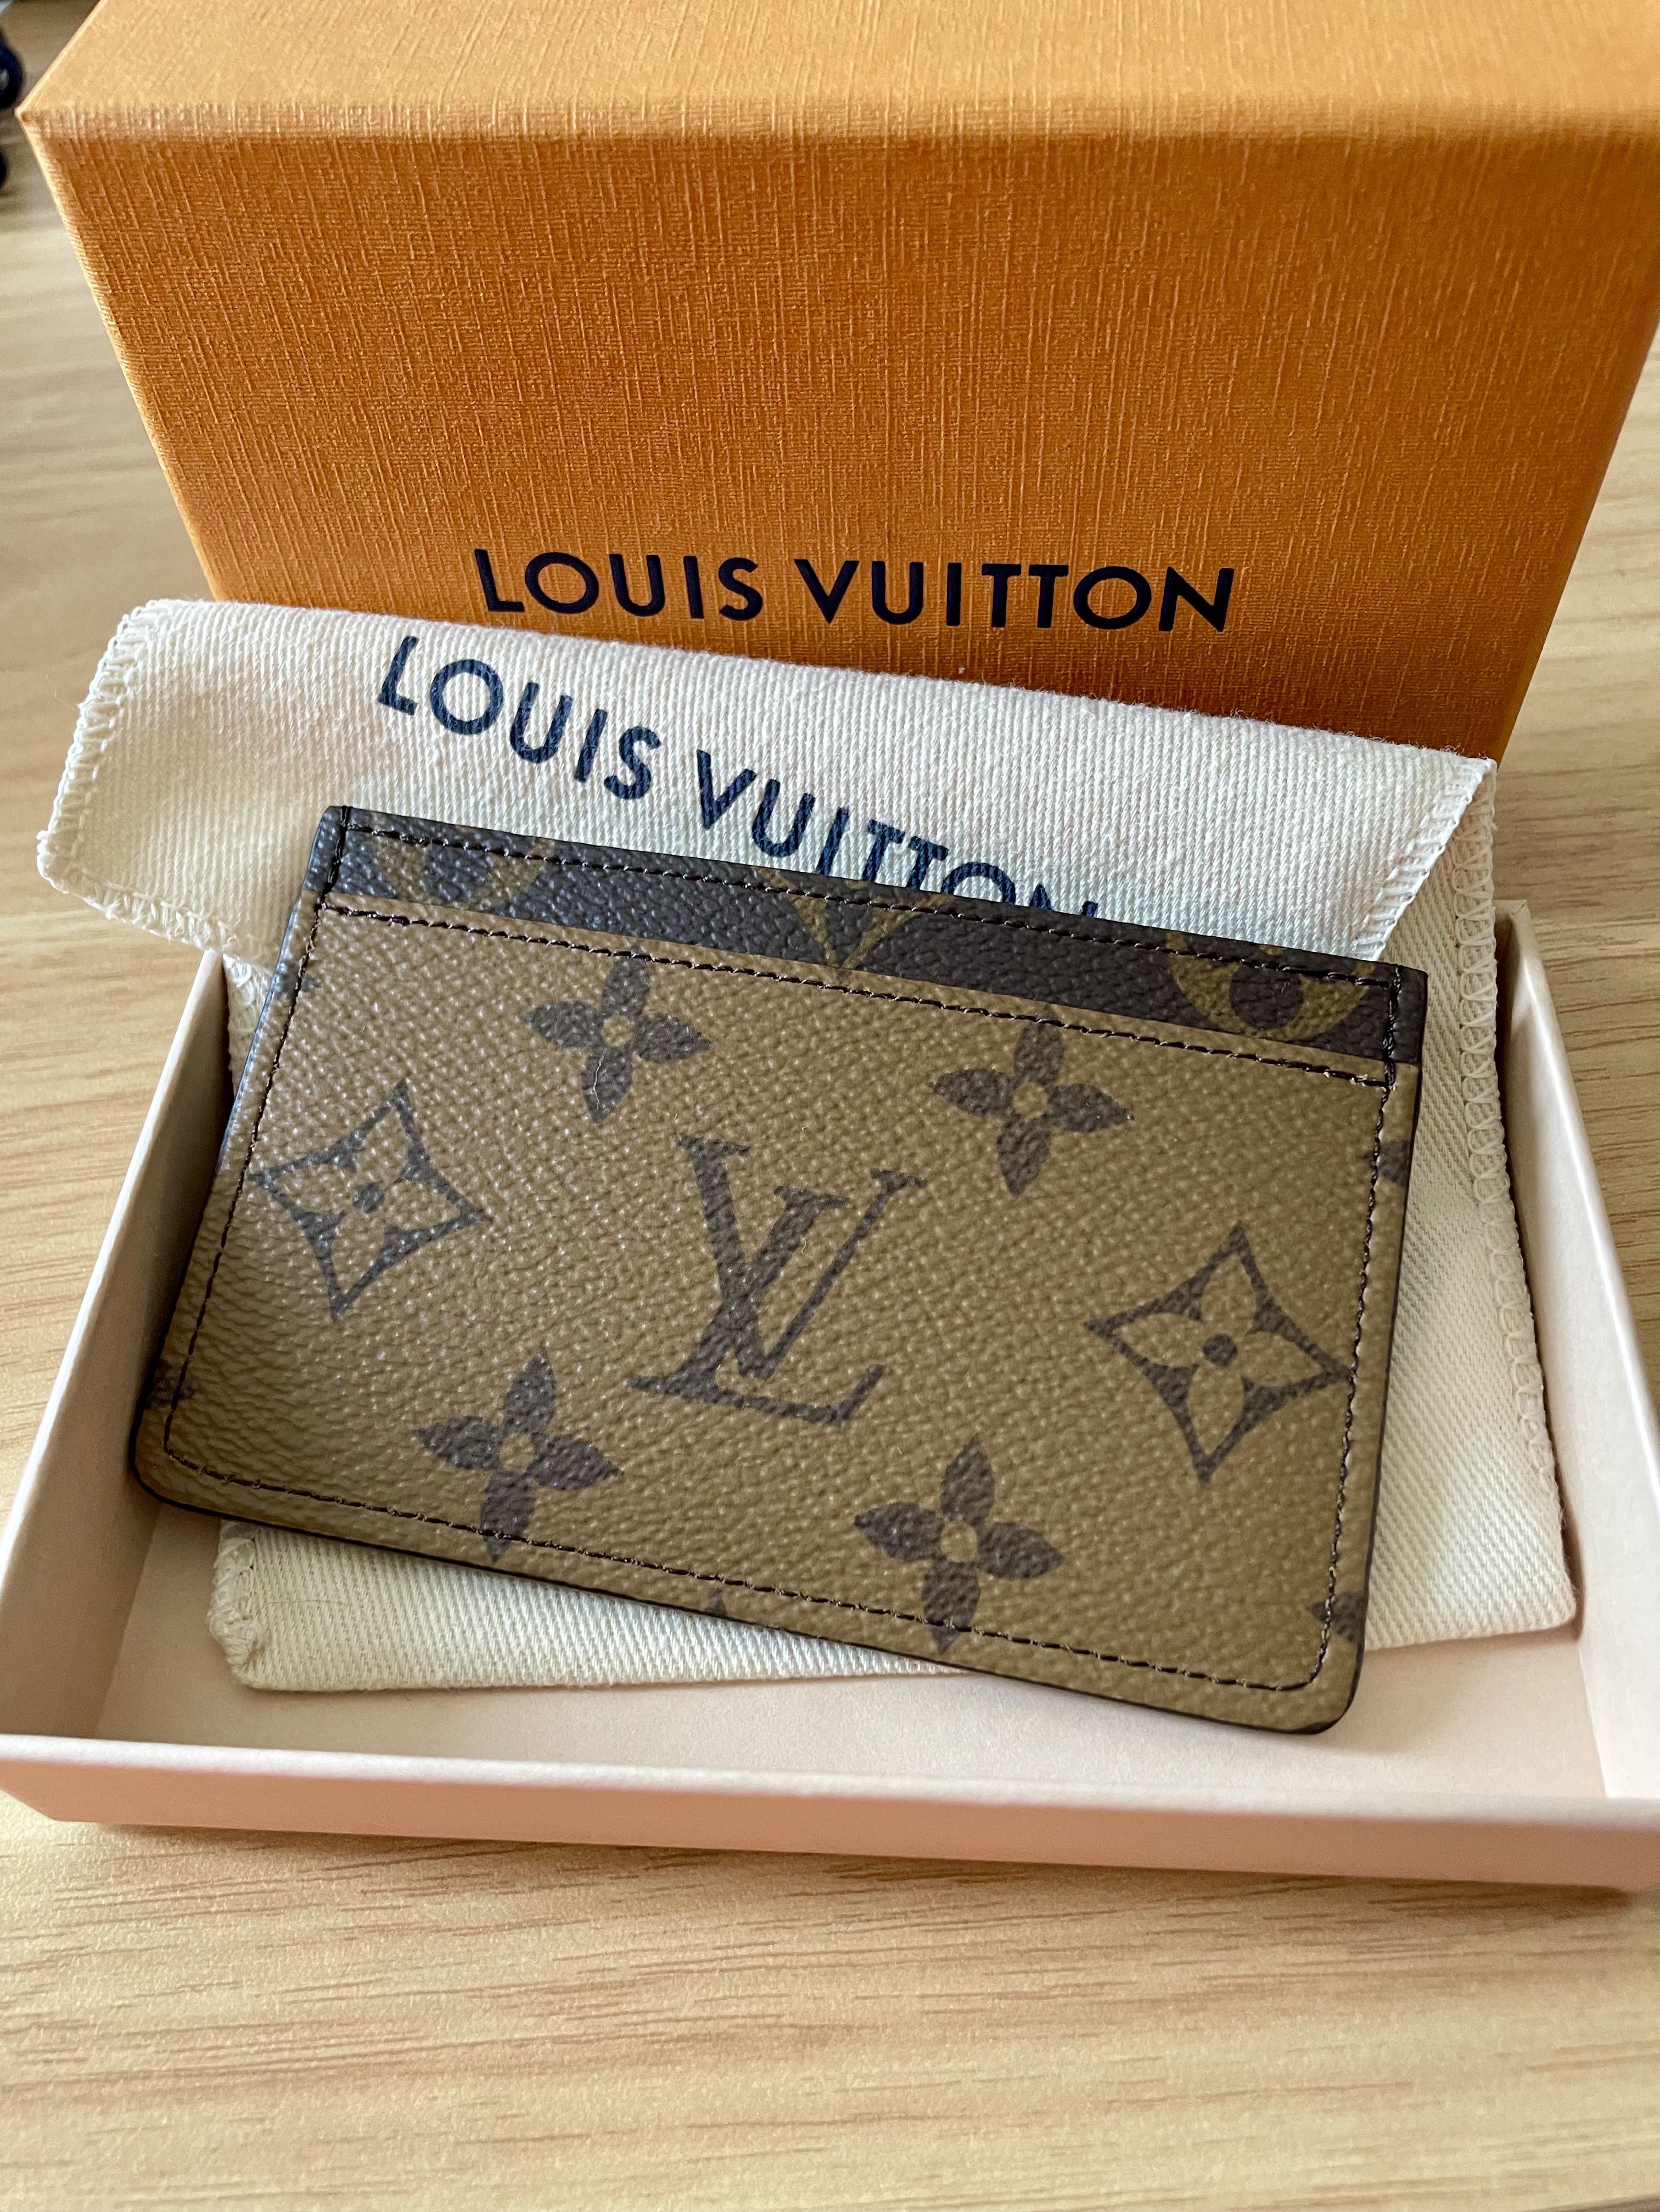 NEW LOUIS VUITTON Felicie 8 Slot Card Holder Pouch Wallet Leather Red HOT  GIFT  eBay